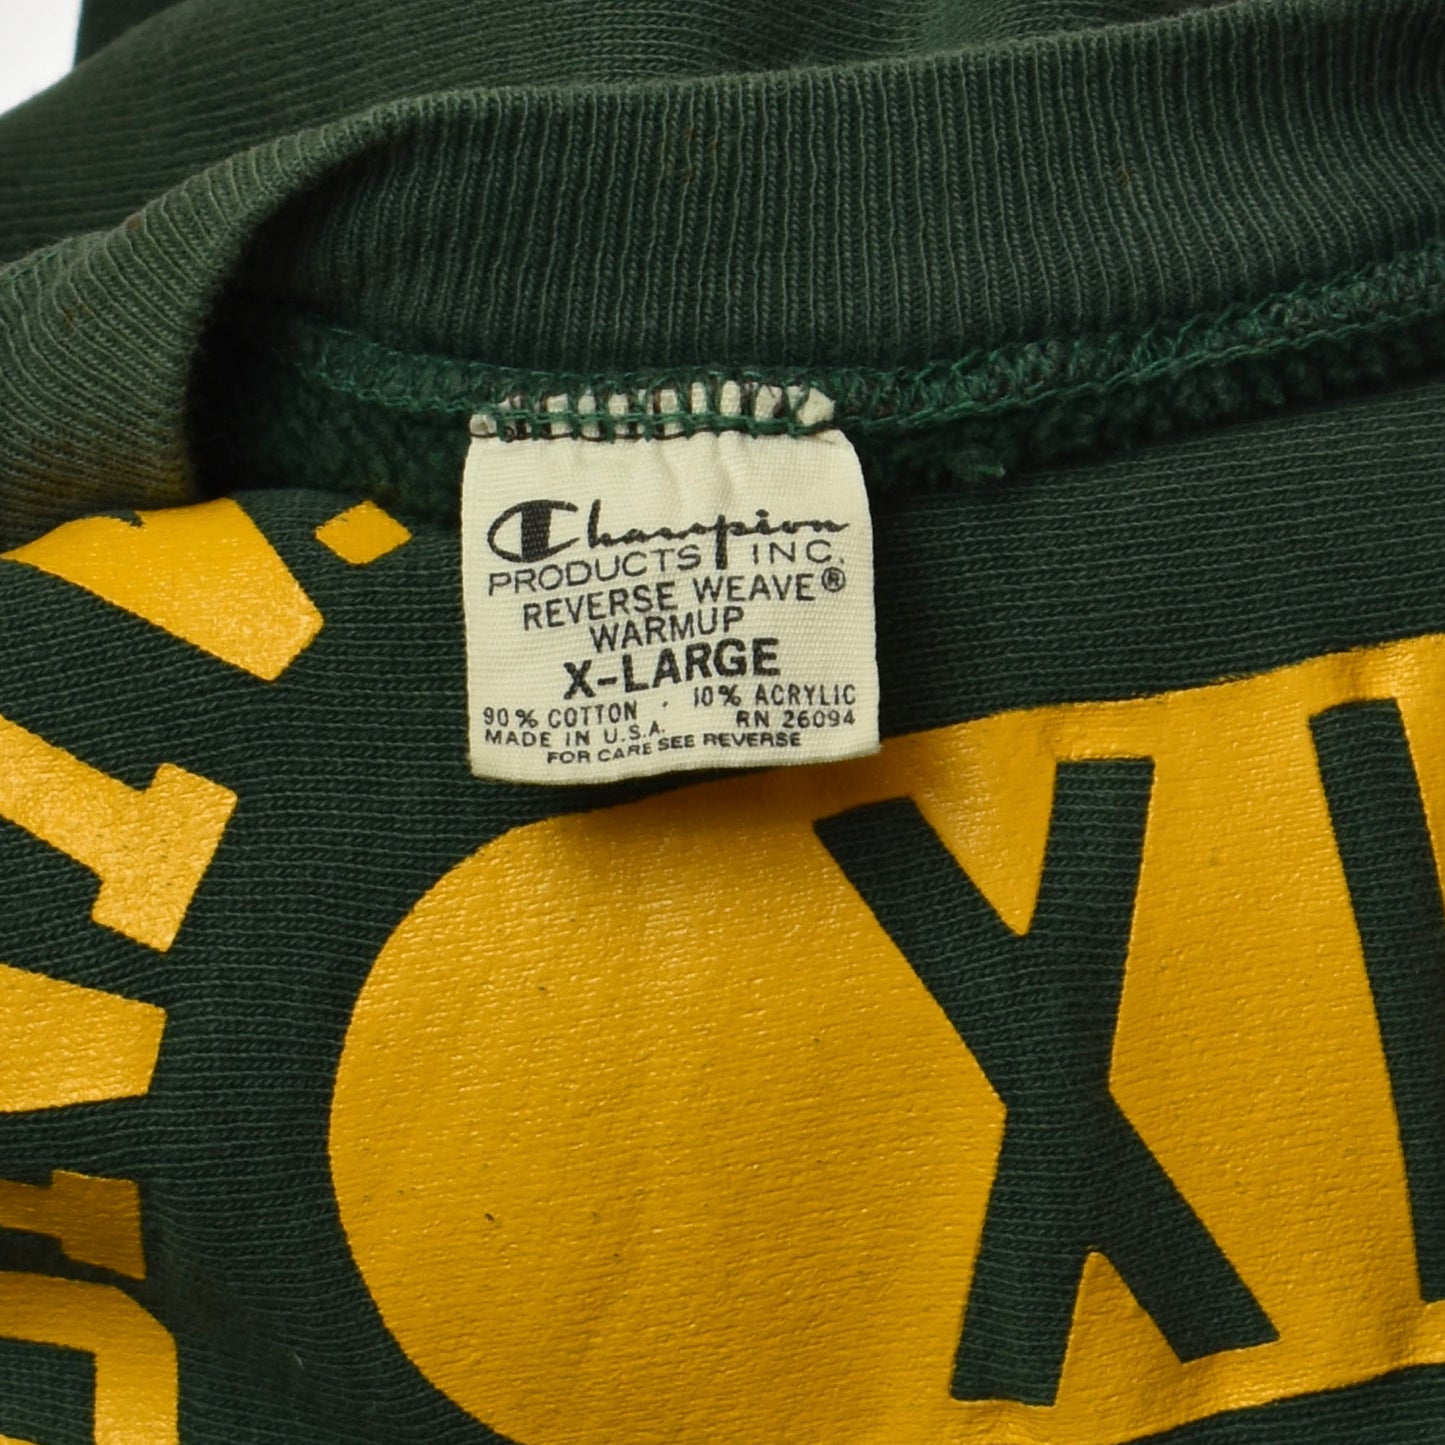 Extremely Rare Vintage 70s Champion Reverse Weave Sweatshirt University of Oregon Ath. Dept. Size XL Made in USA